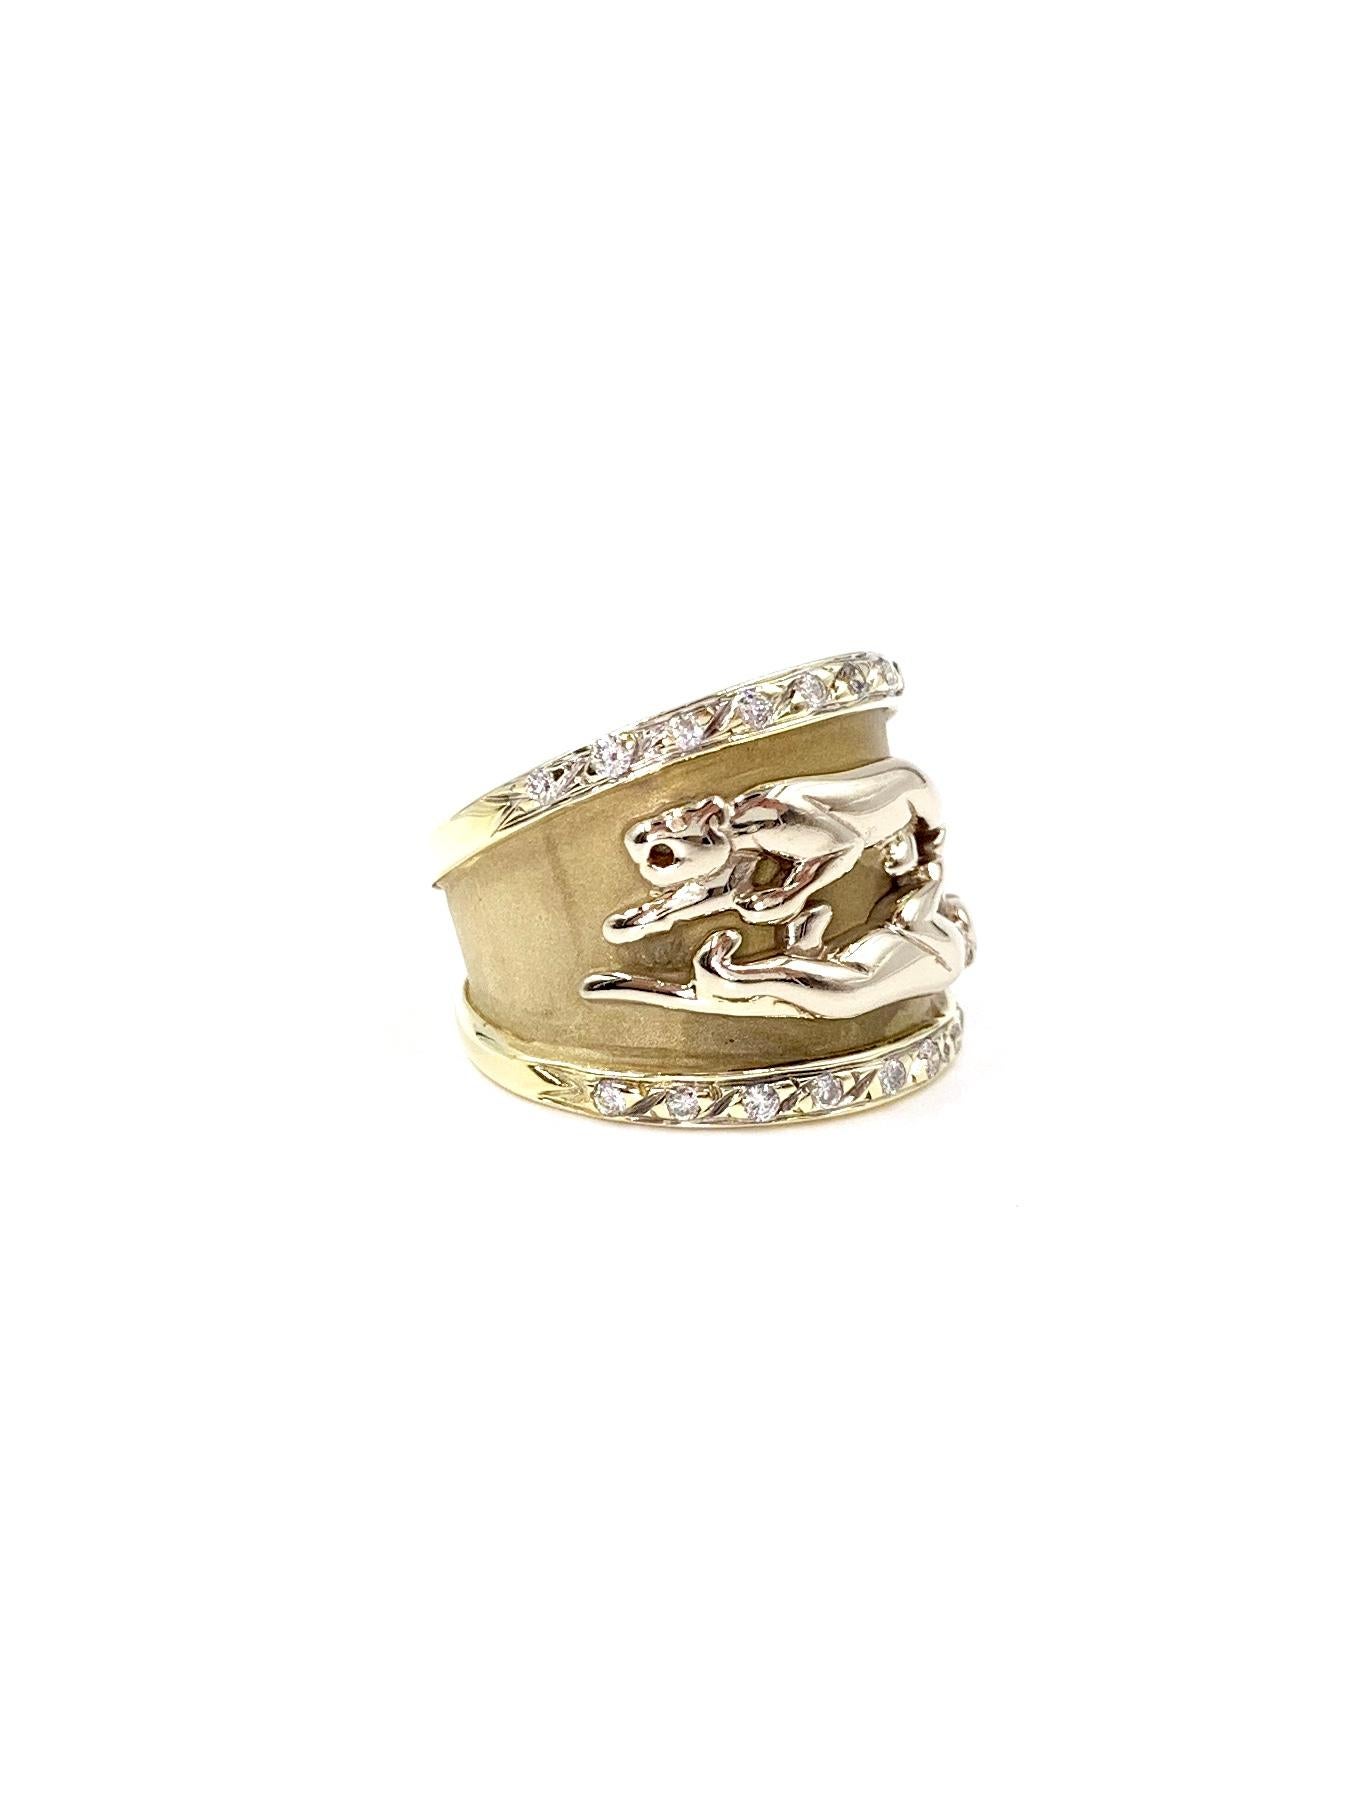 A solid 14 karat yellow gold wide band with an acid wash finish and two raised polished panthers. Polished beveled edges of ring feature 22 diamonds at .25 carats total weight. Diamond quality is approximately G color, VS2 clarity. Width of ring